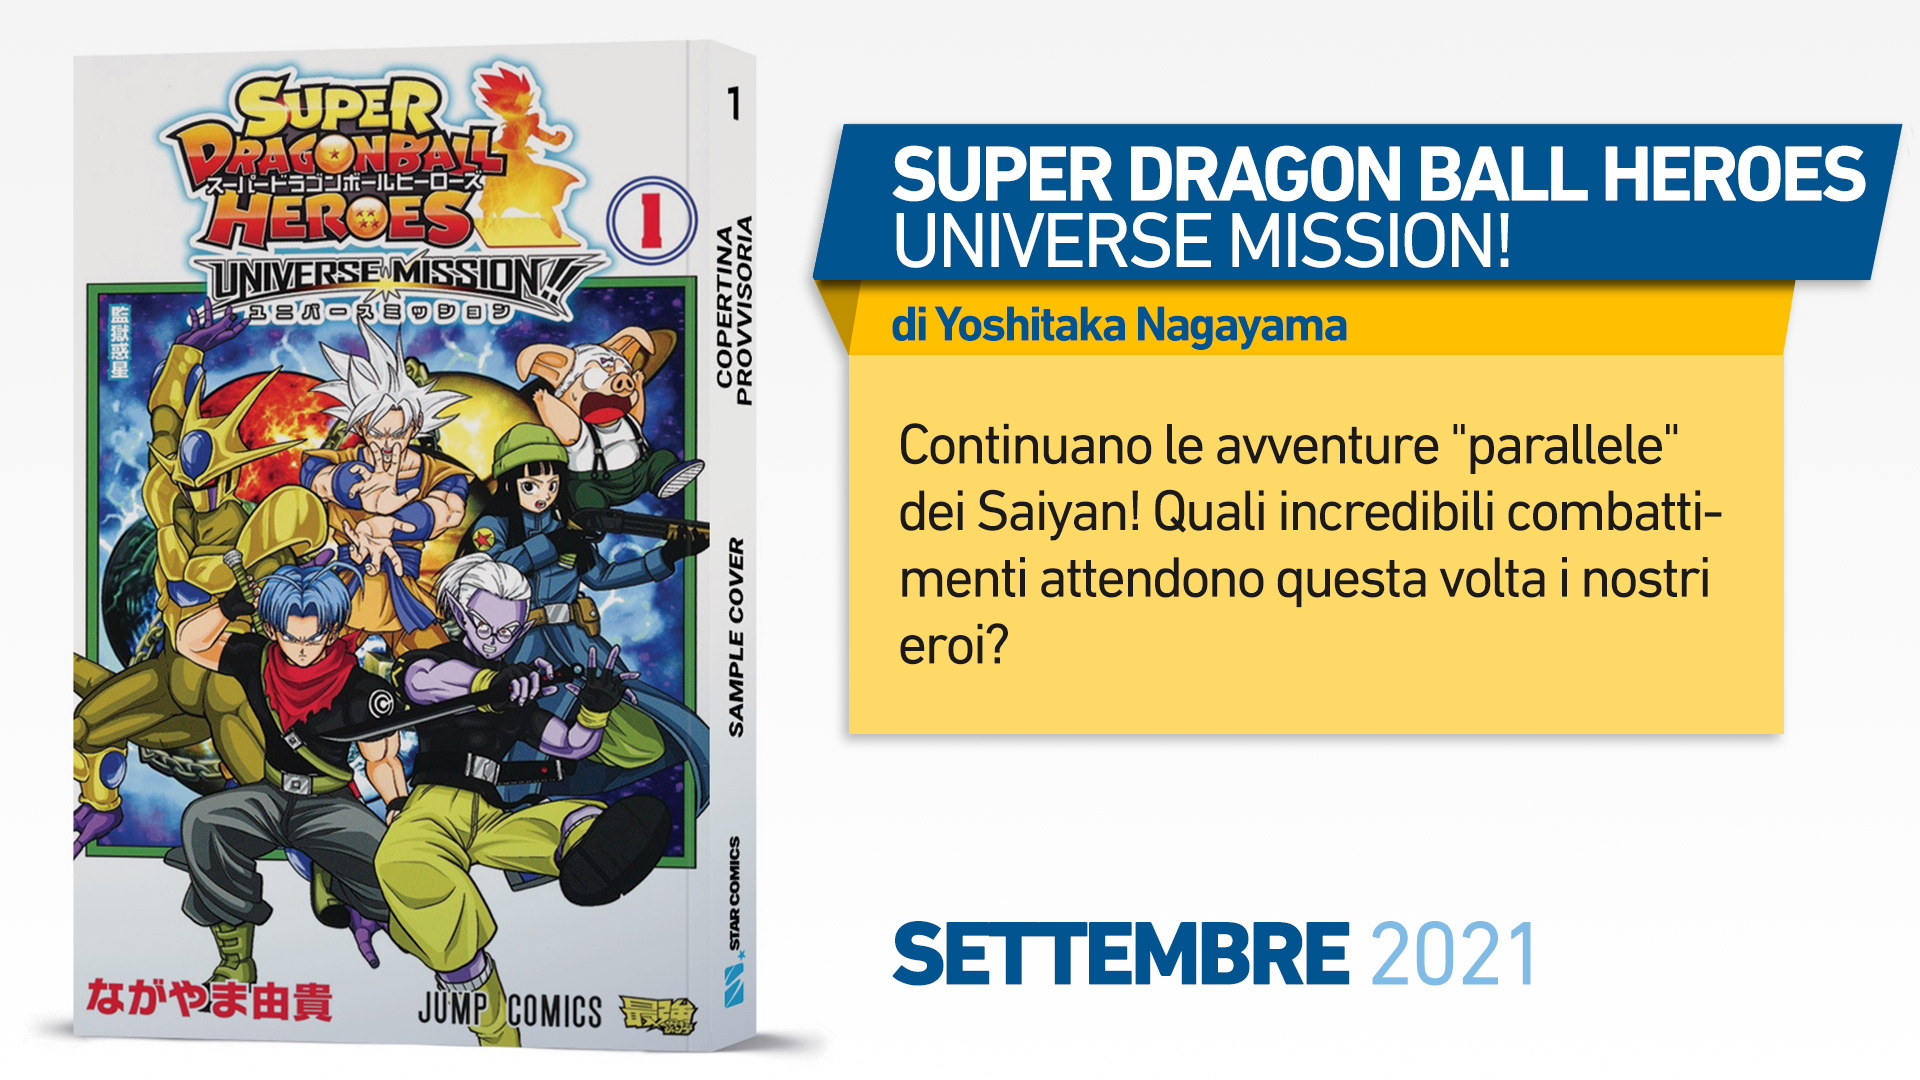 SUPER DRAGON BALL HEROES - UNIVERSE MISSION!